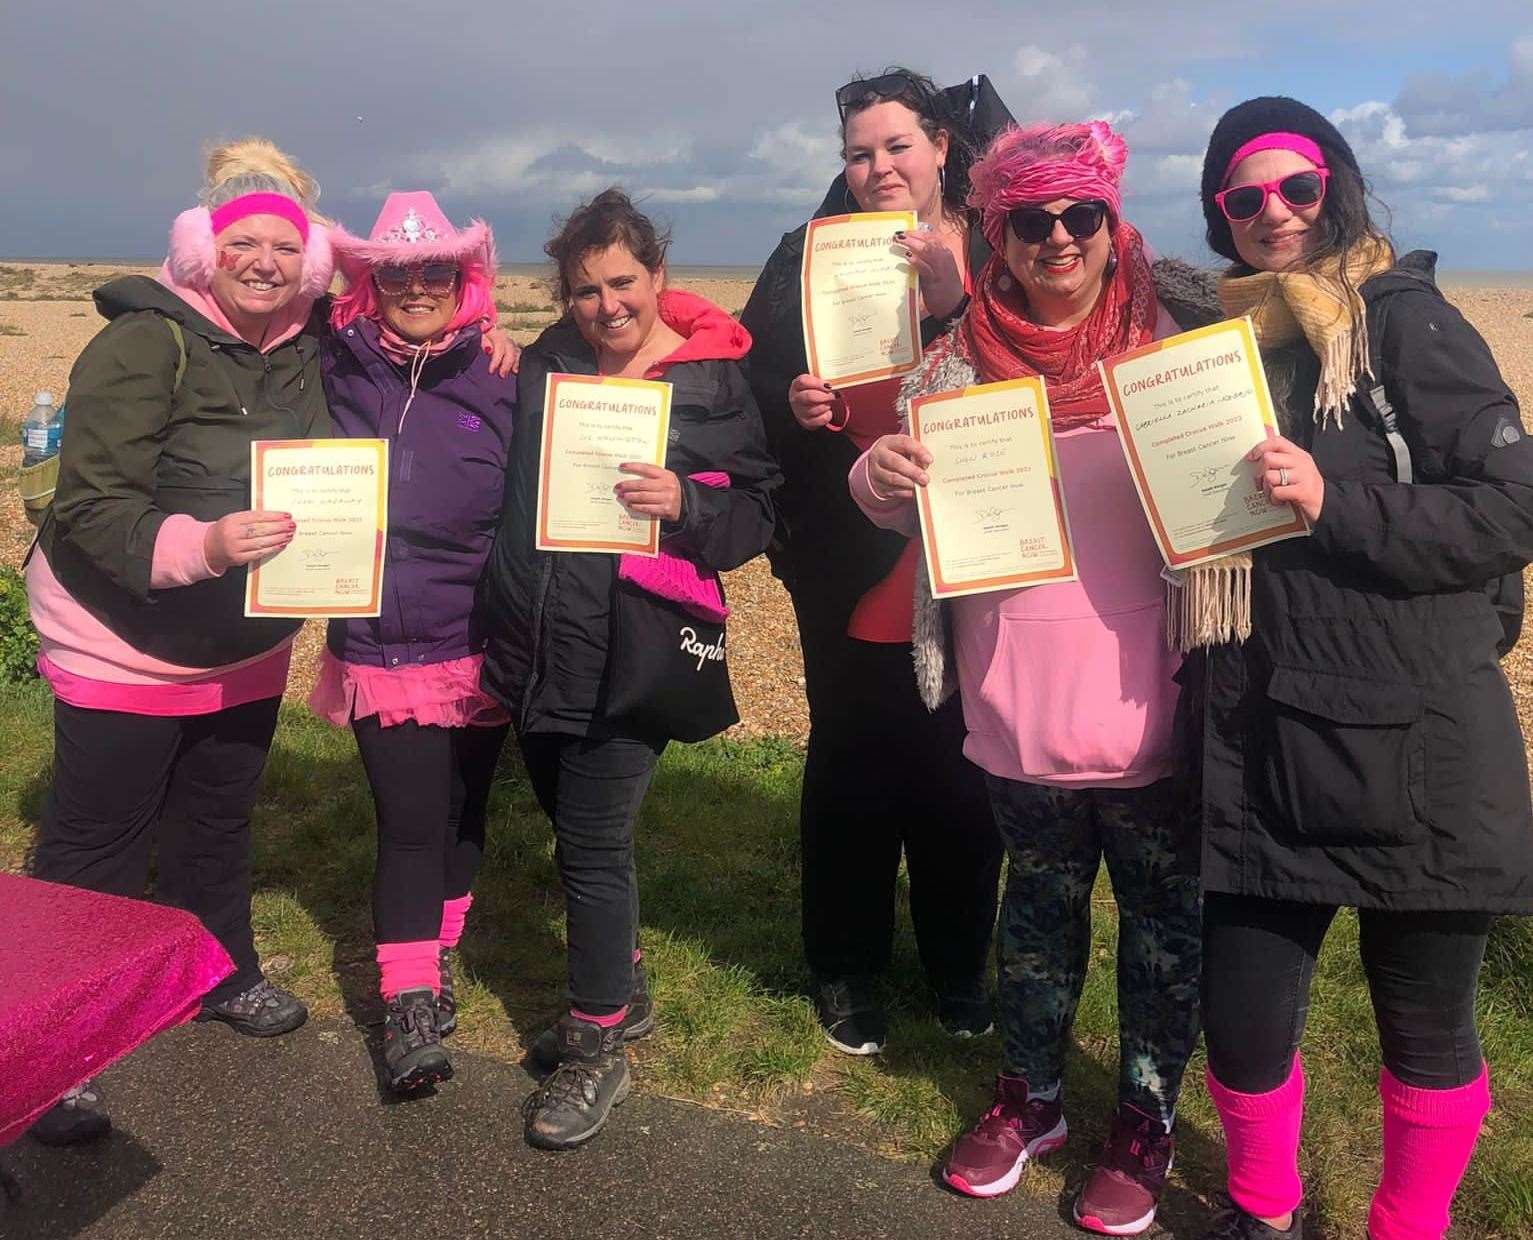 Walkers were awarded certificates for completing the 15k walk in aid of Breast Cancer Now